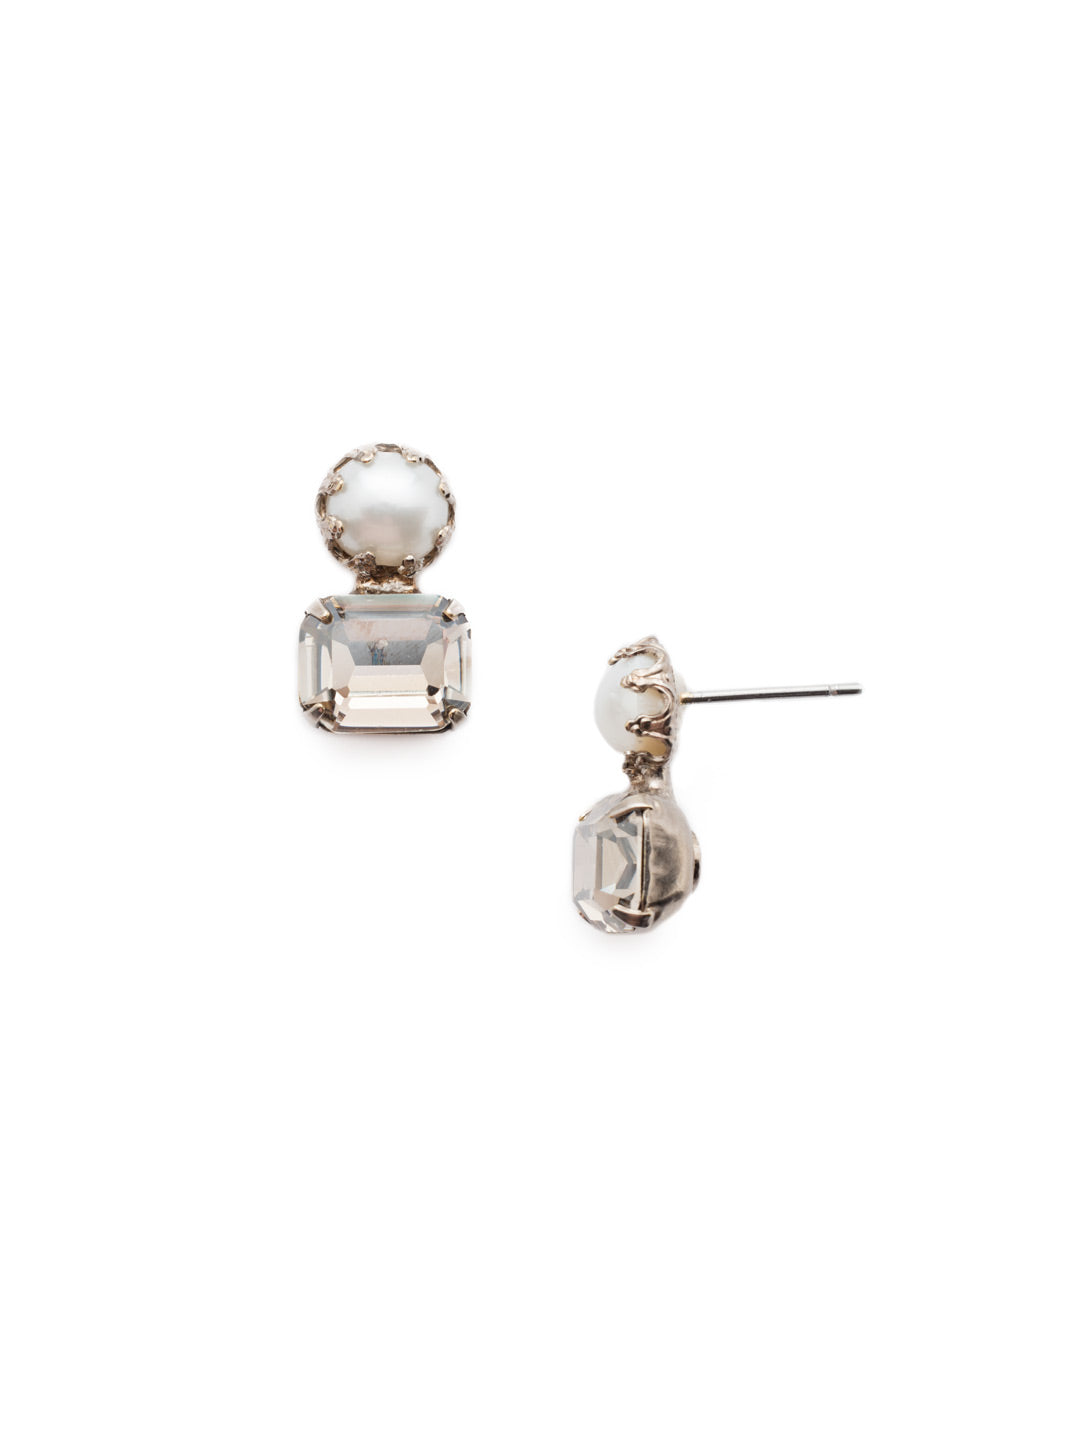 Deandra Stud Earring - EES10ASGNS - The Deandra Stud Earrings are class summed up in a simple design. Fasten on the freshwater pearl attached to a sparkling cushion emerald cut stone and shine bright day or night. From Sorrelli's Golden Shadow collection in our Antique Silver-tone finish.